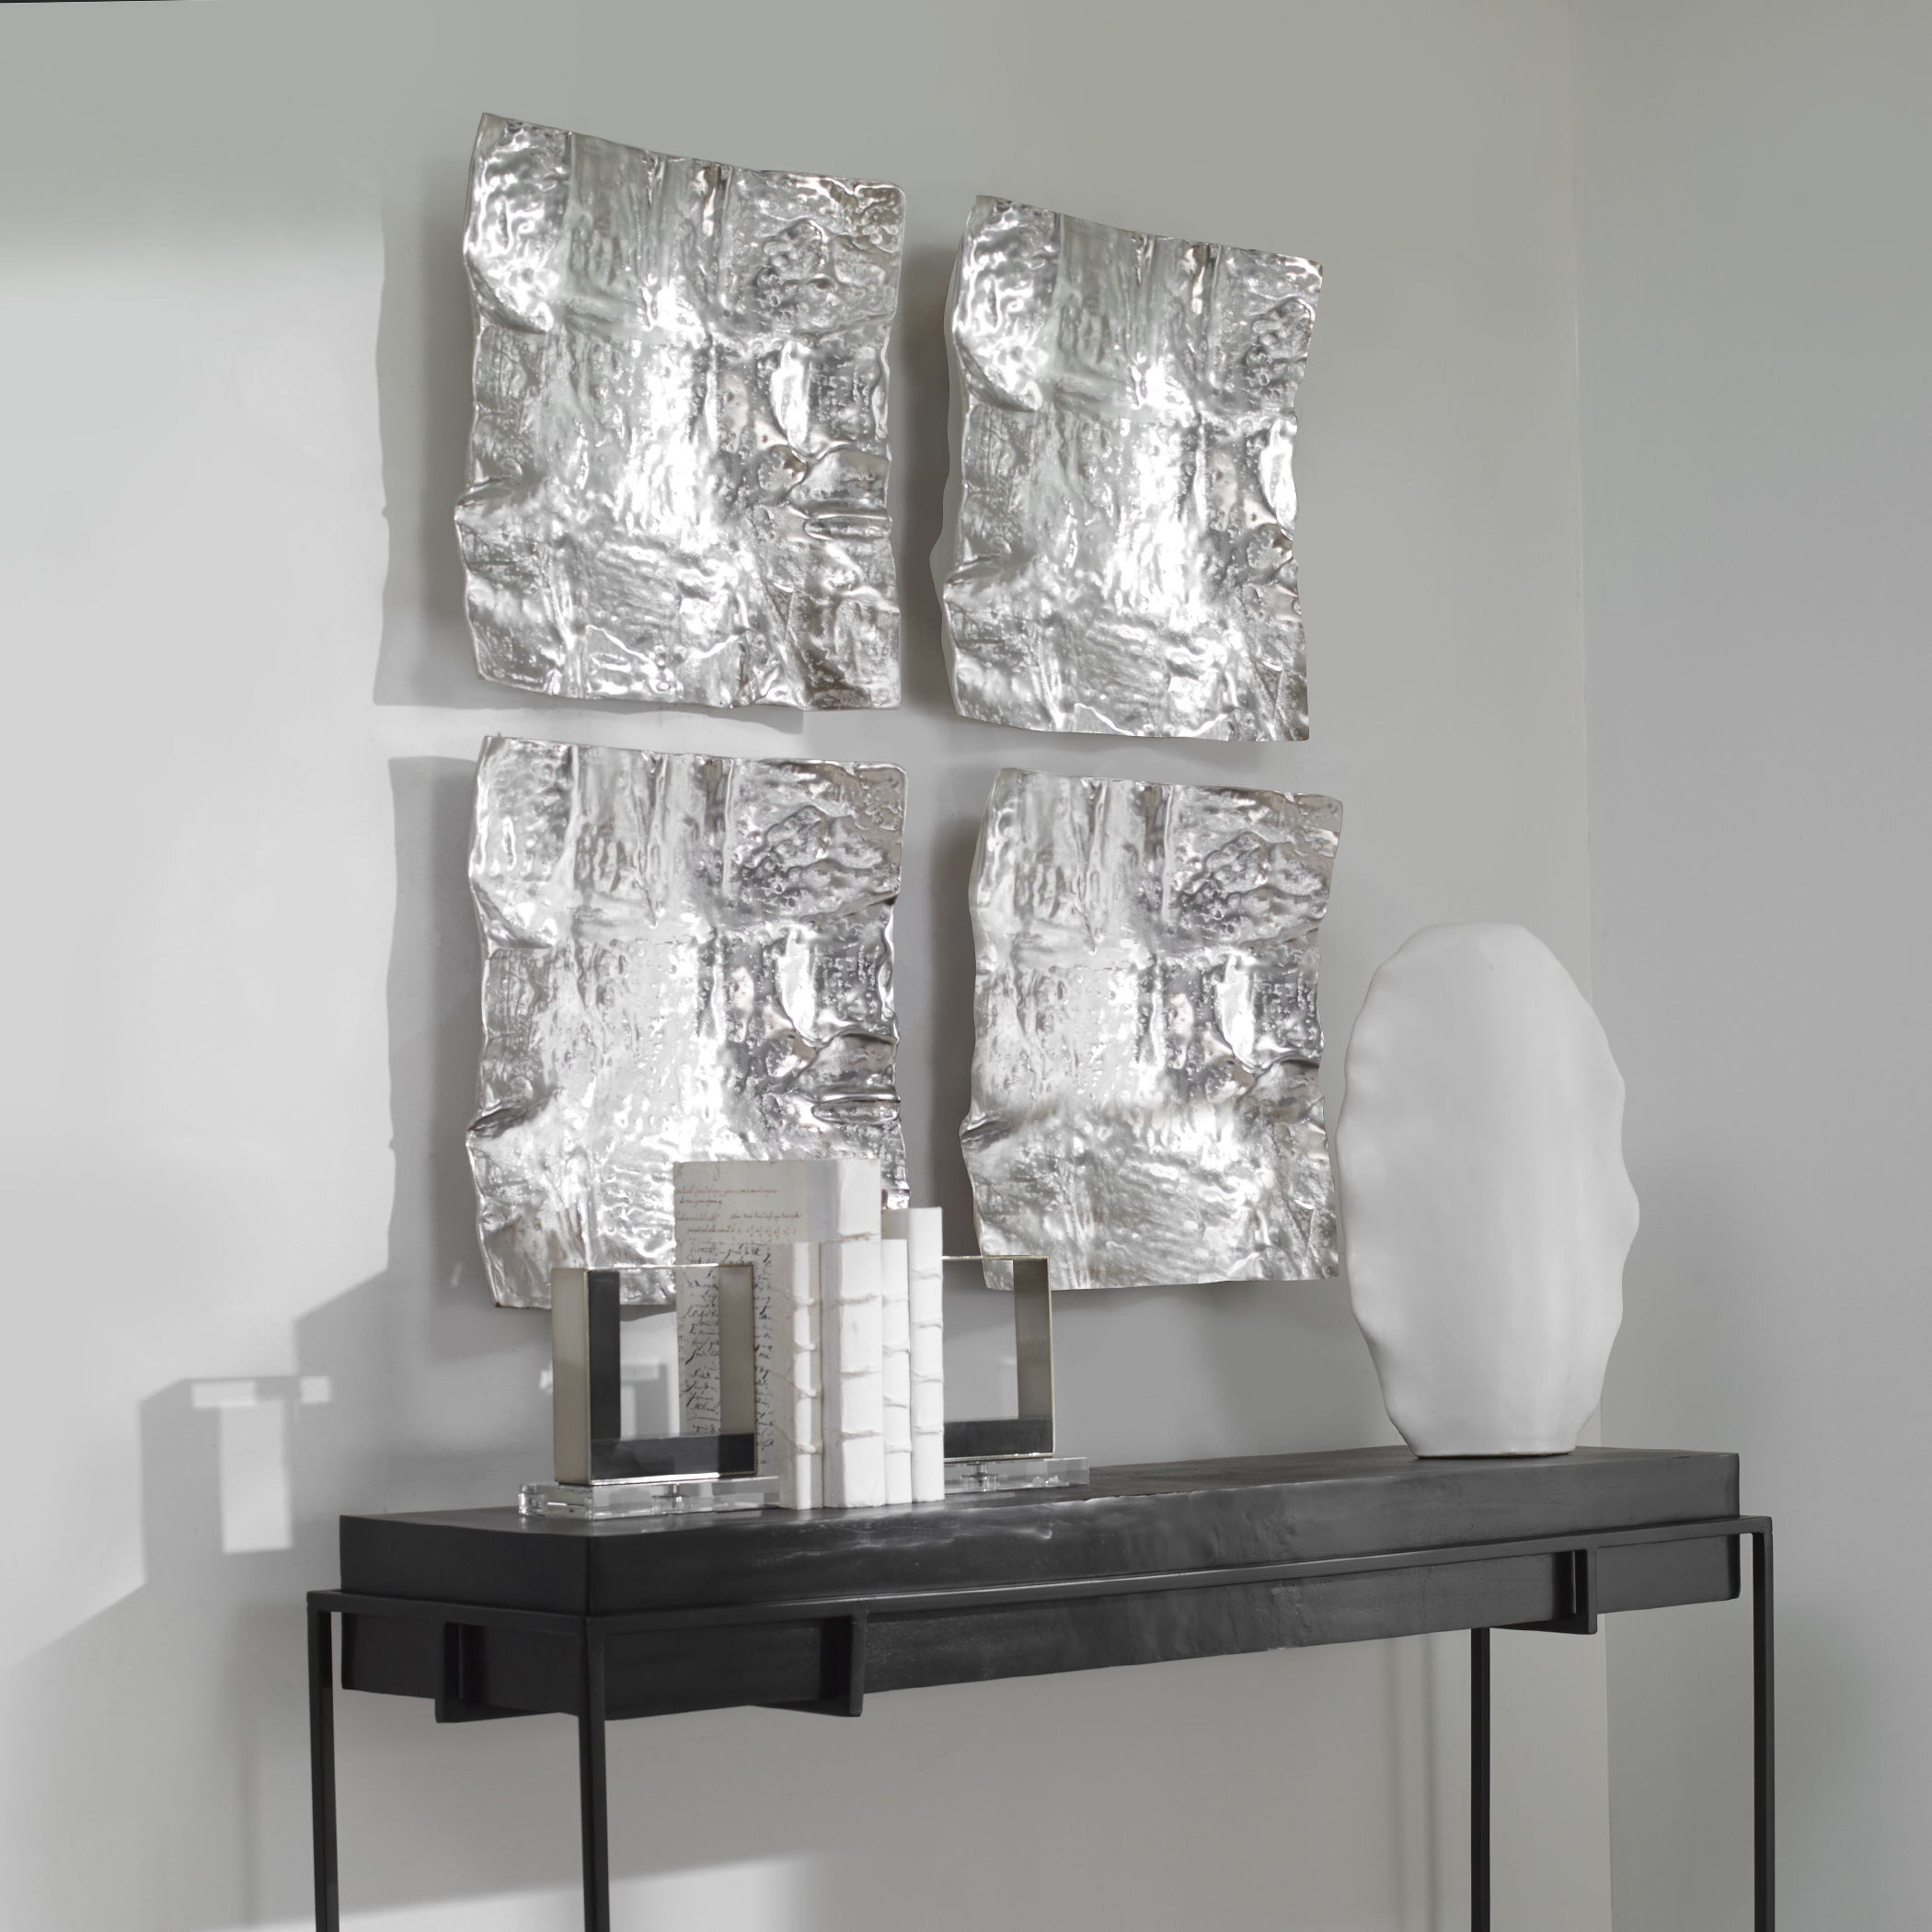 Archive Nickel Wall Decor - Image 2